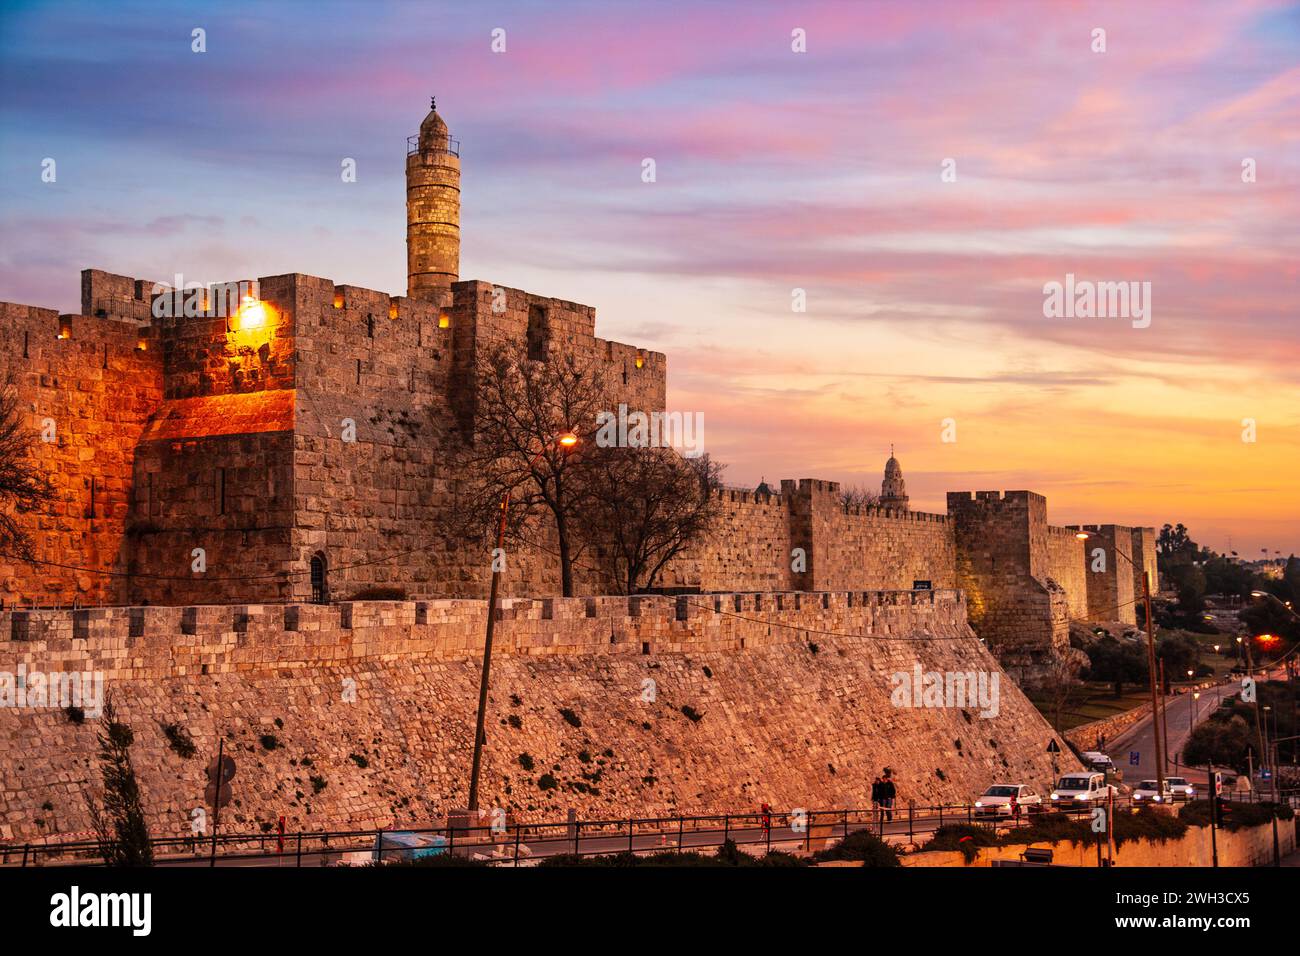 View of the old city wall of Jerusalem on the Tower of David and traffic around the city centre. Jerusalem, Israel - Jan 24, 2011 Stock Photo